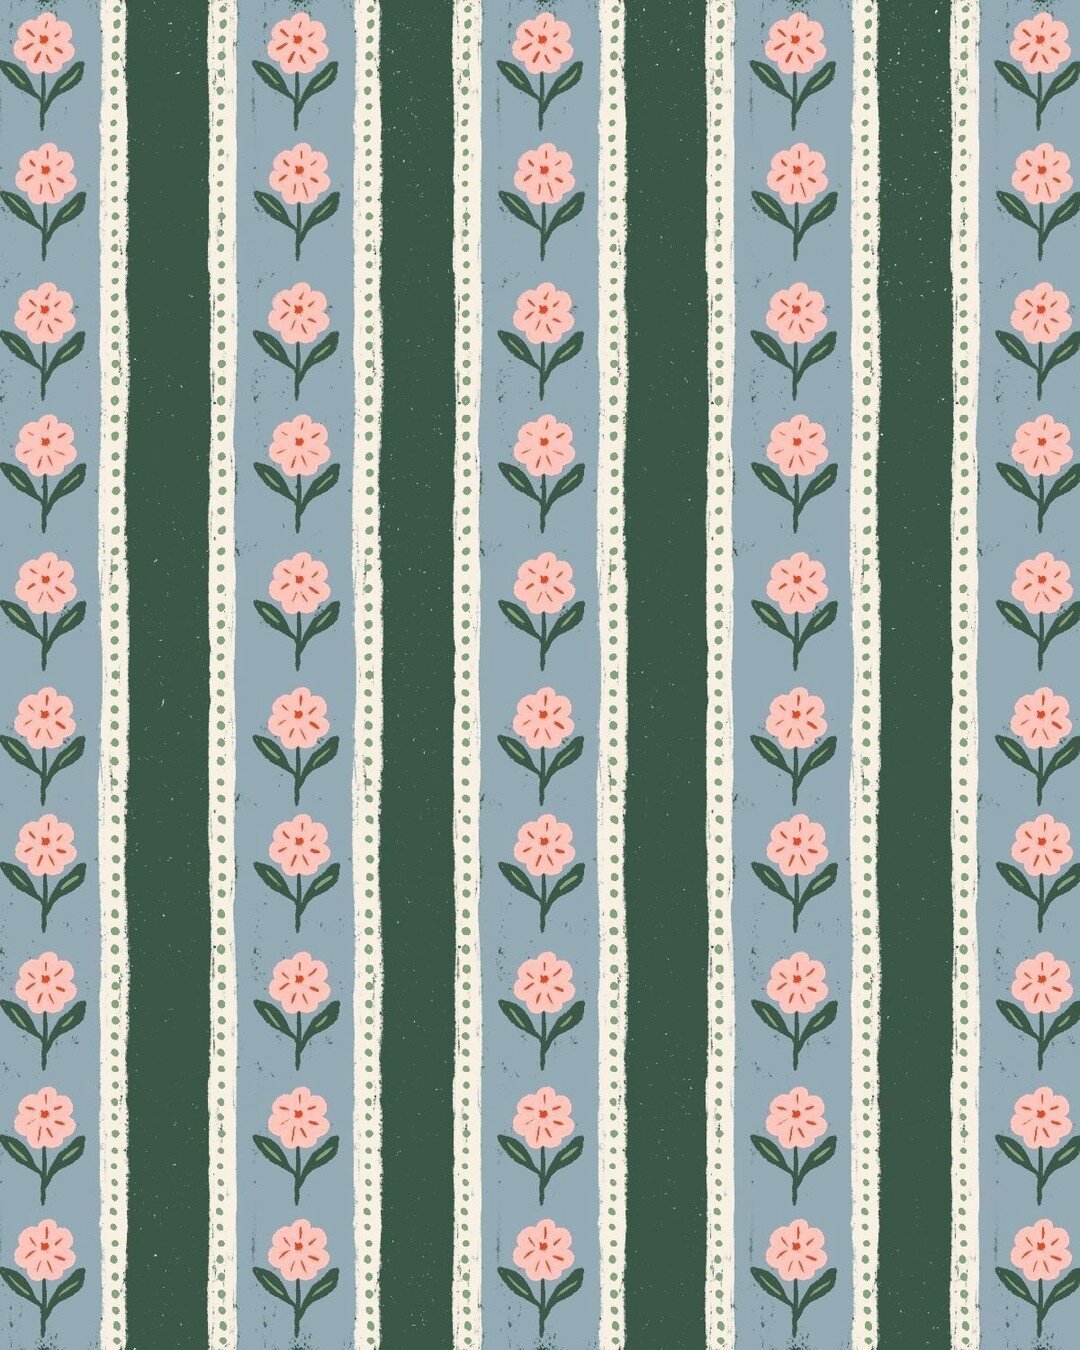 Just sent this pattern off as April&rsquo;s monthly wallpaper download to my email list this morning! There are also some super sneak peeks at some products coming to the shop and to @greatrivermakersmarket + @marketonthemississippi! Want in on the f